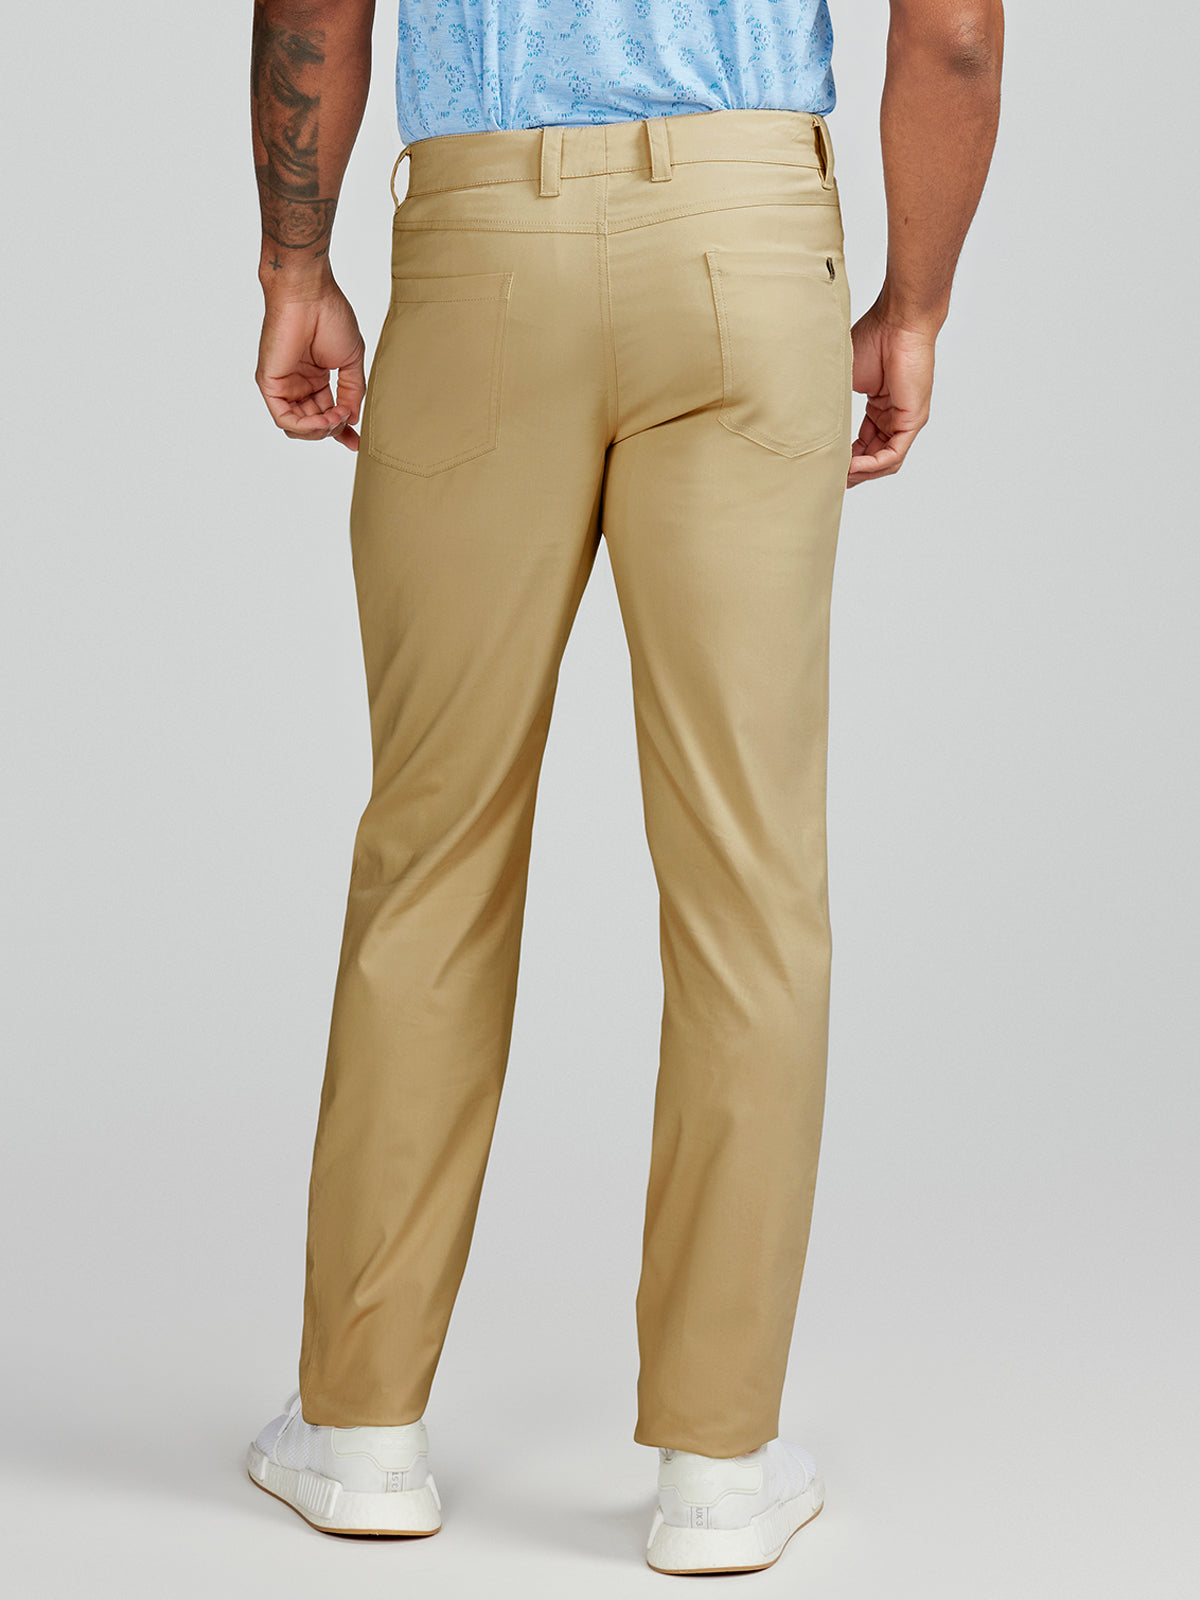 Athletic Fit Stretch Pants - Lightweight Heathered Bamboo - State